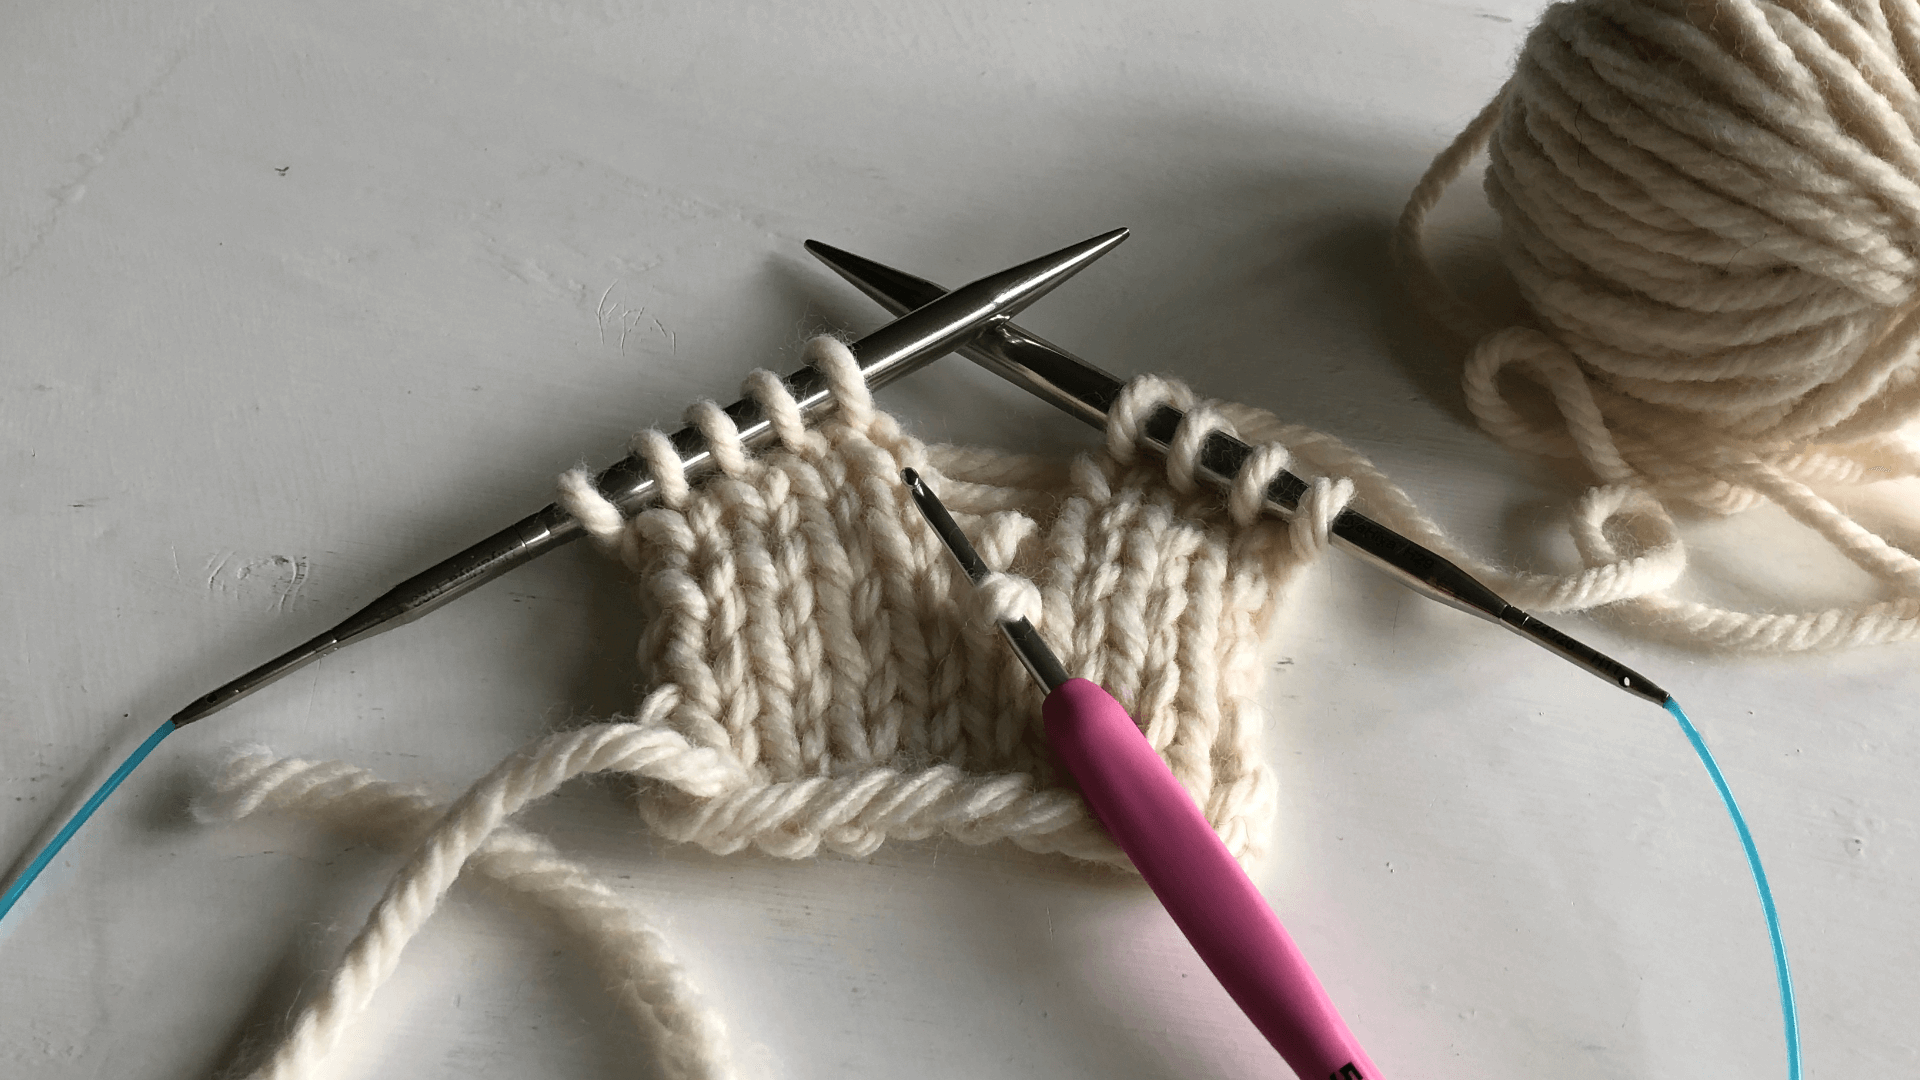 Start with catching the dropped stitch with your hook